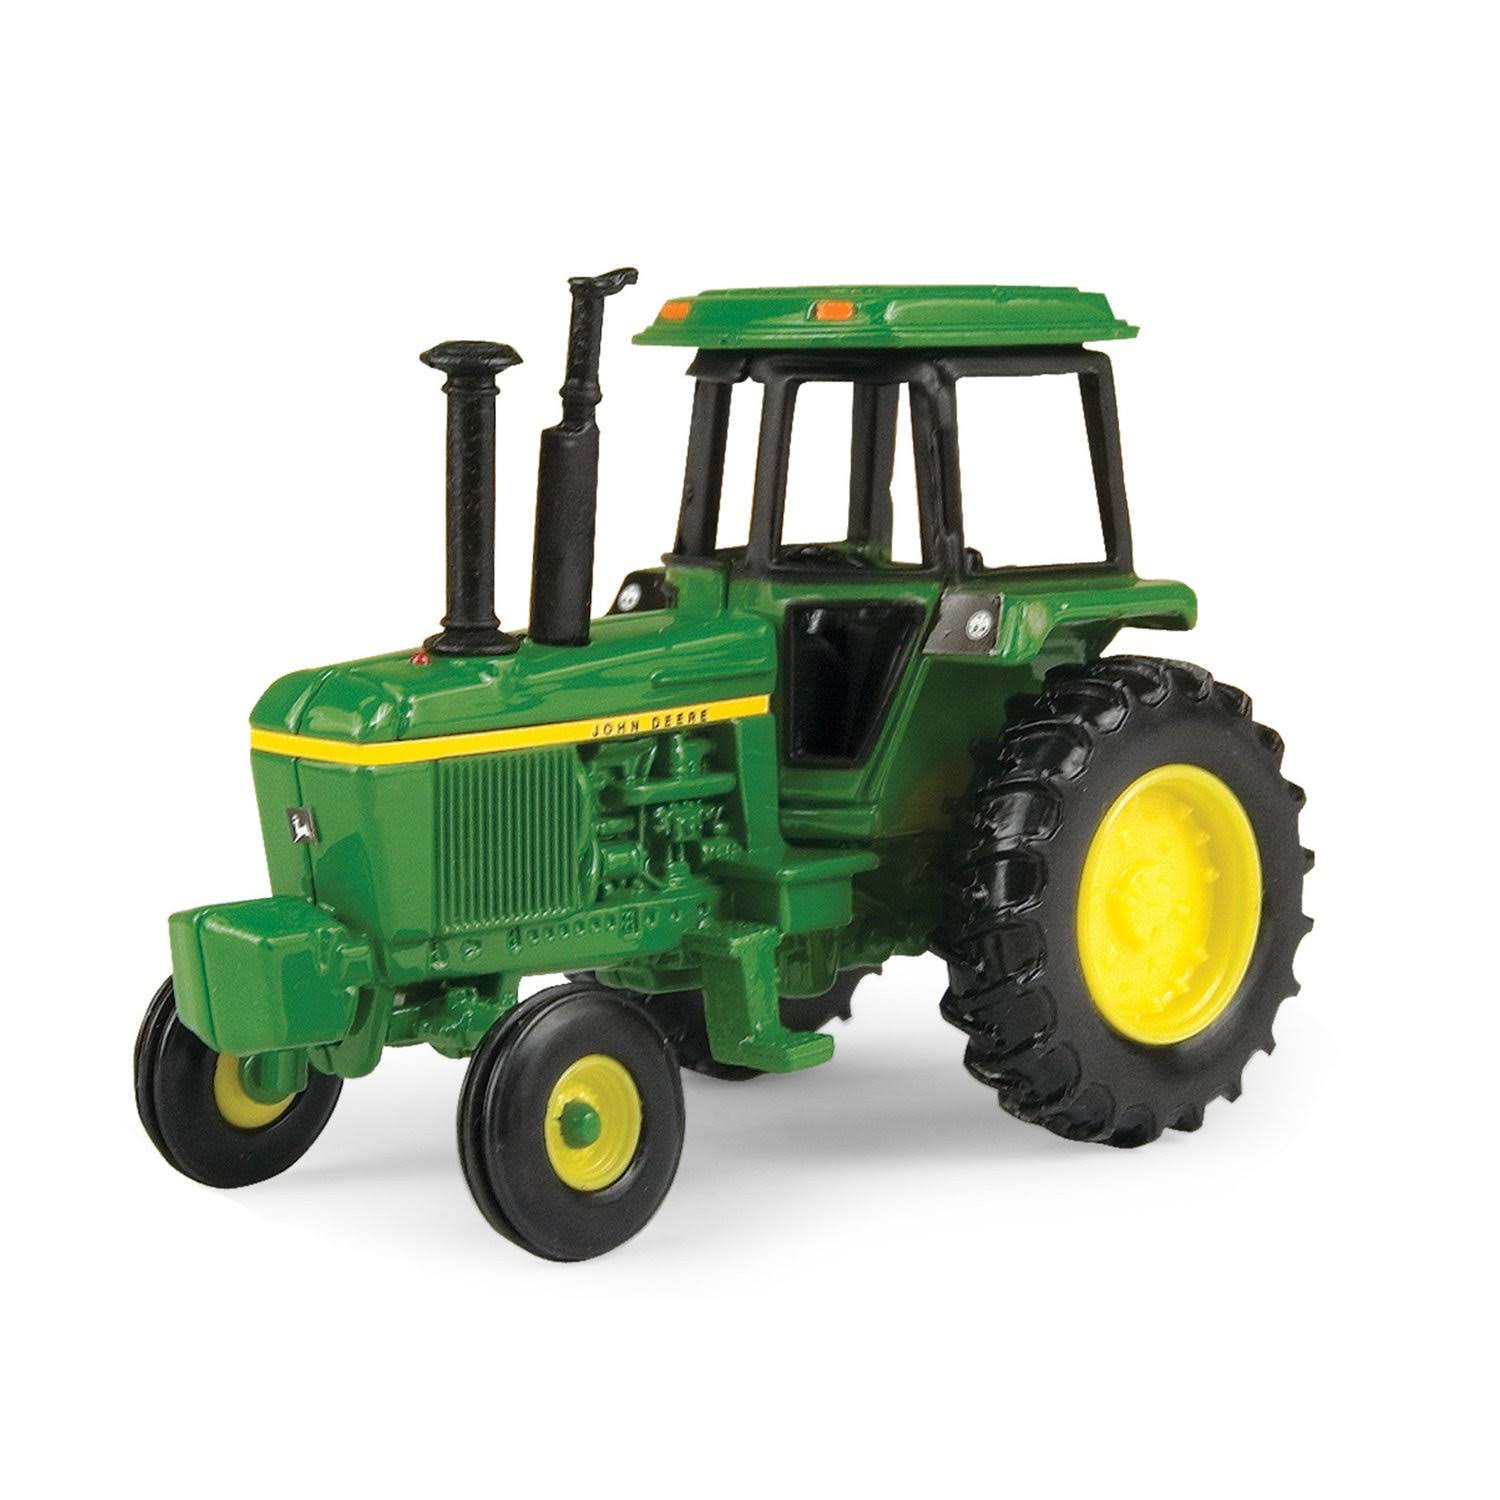 Tomy Toys John Deere Soundguard Tractor Toy - 1:64 Scale